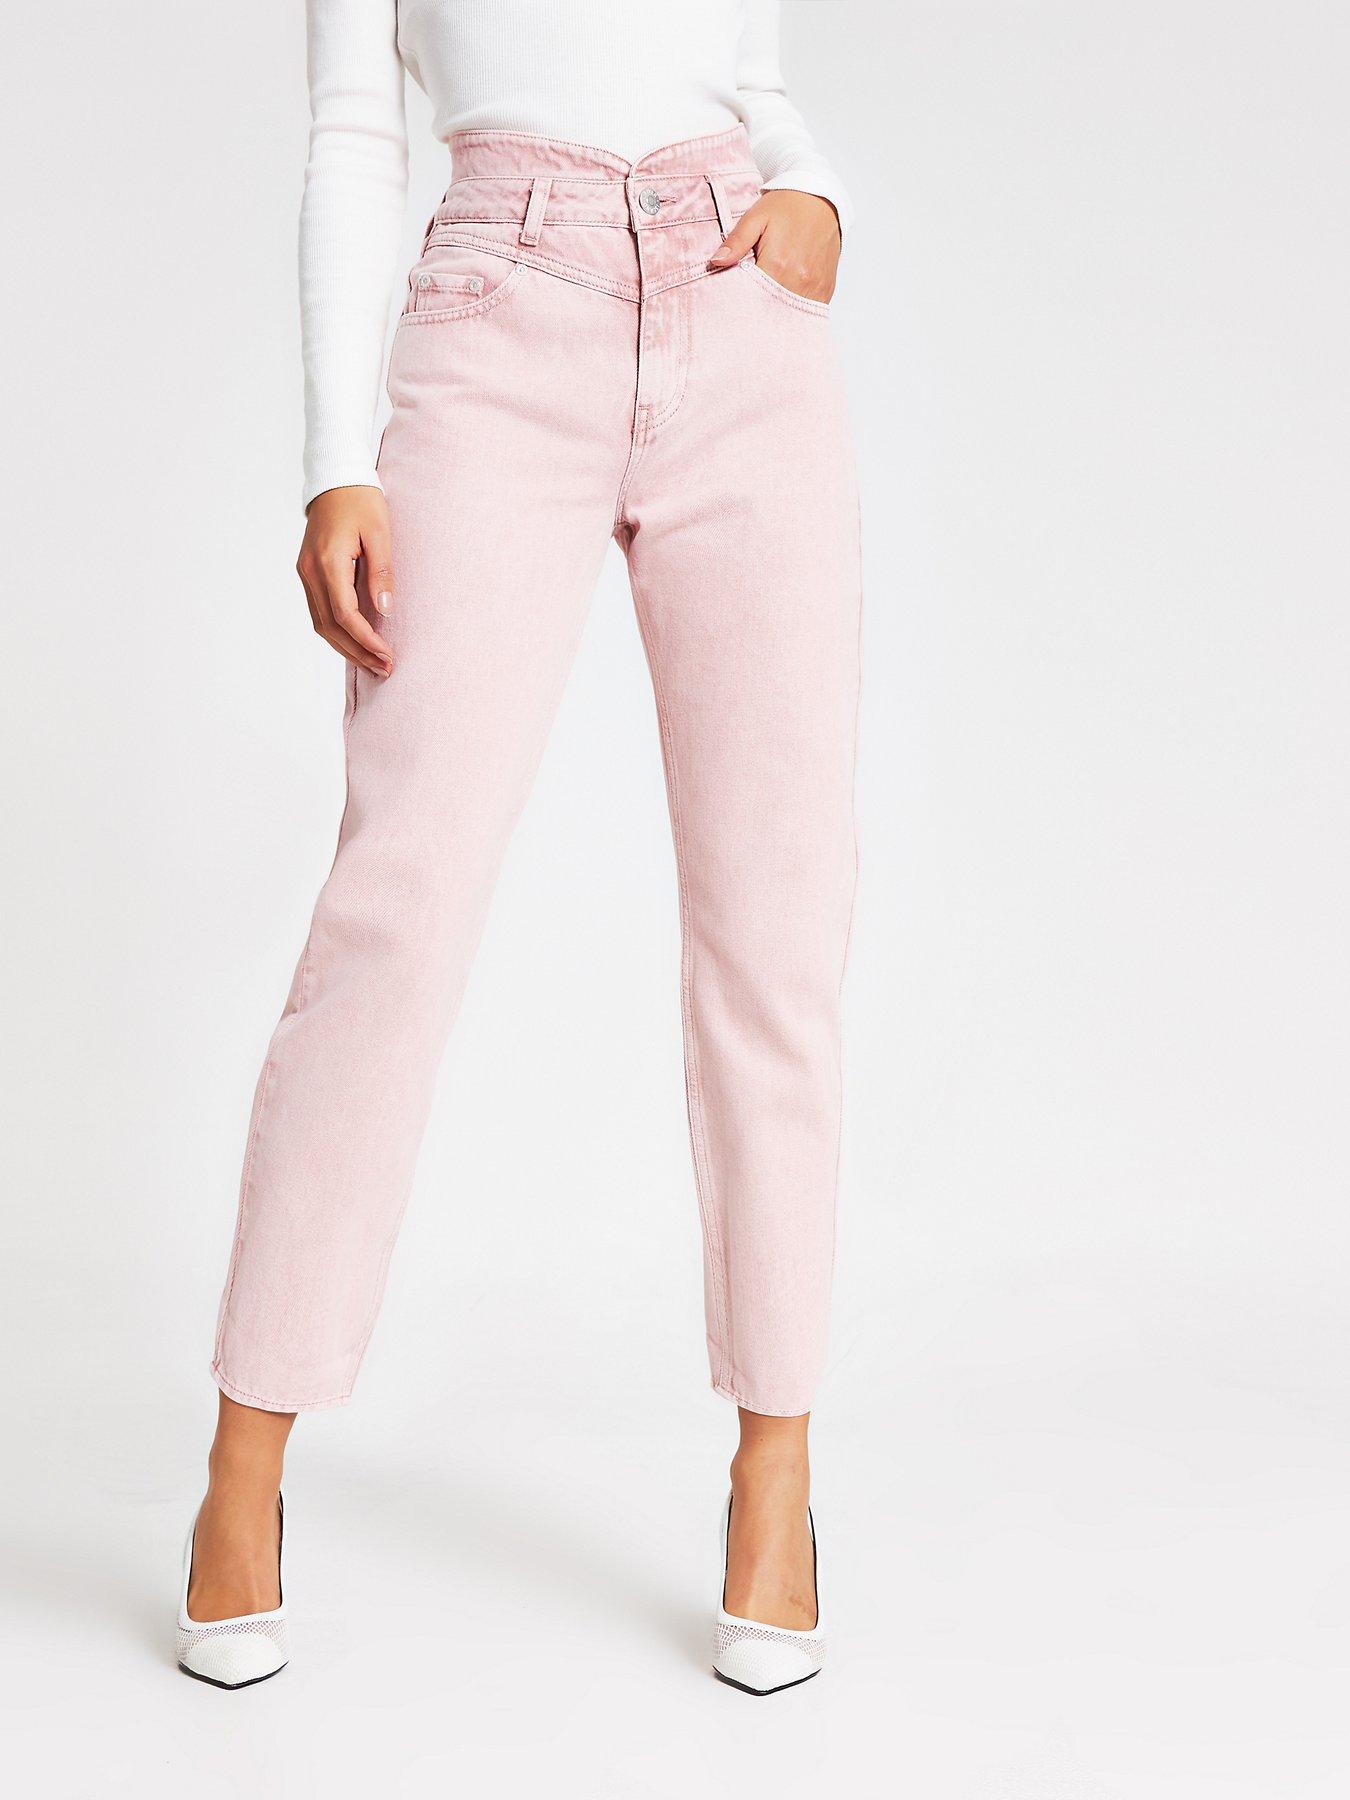 pale pink jeans